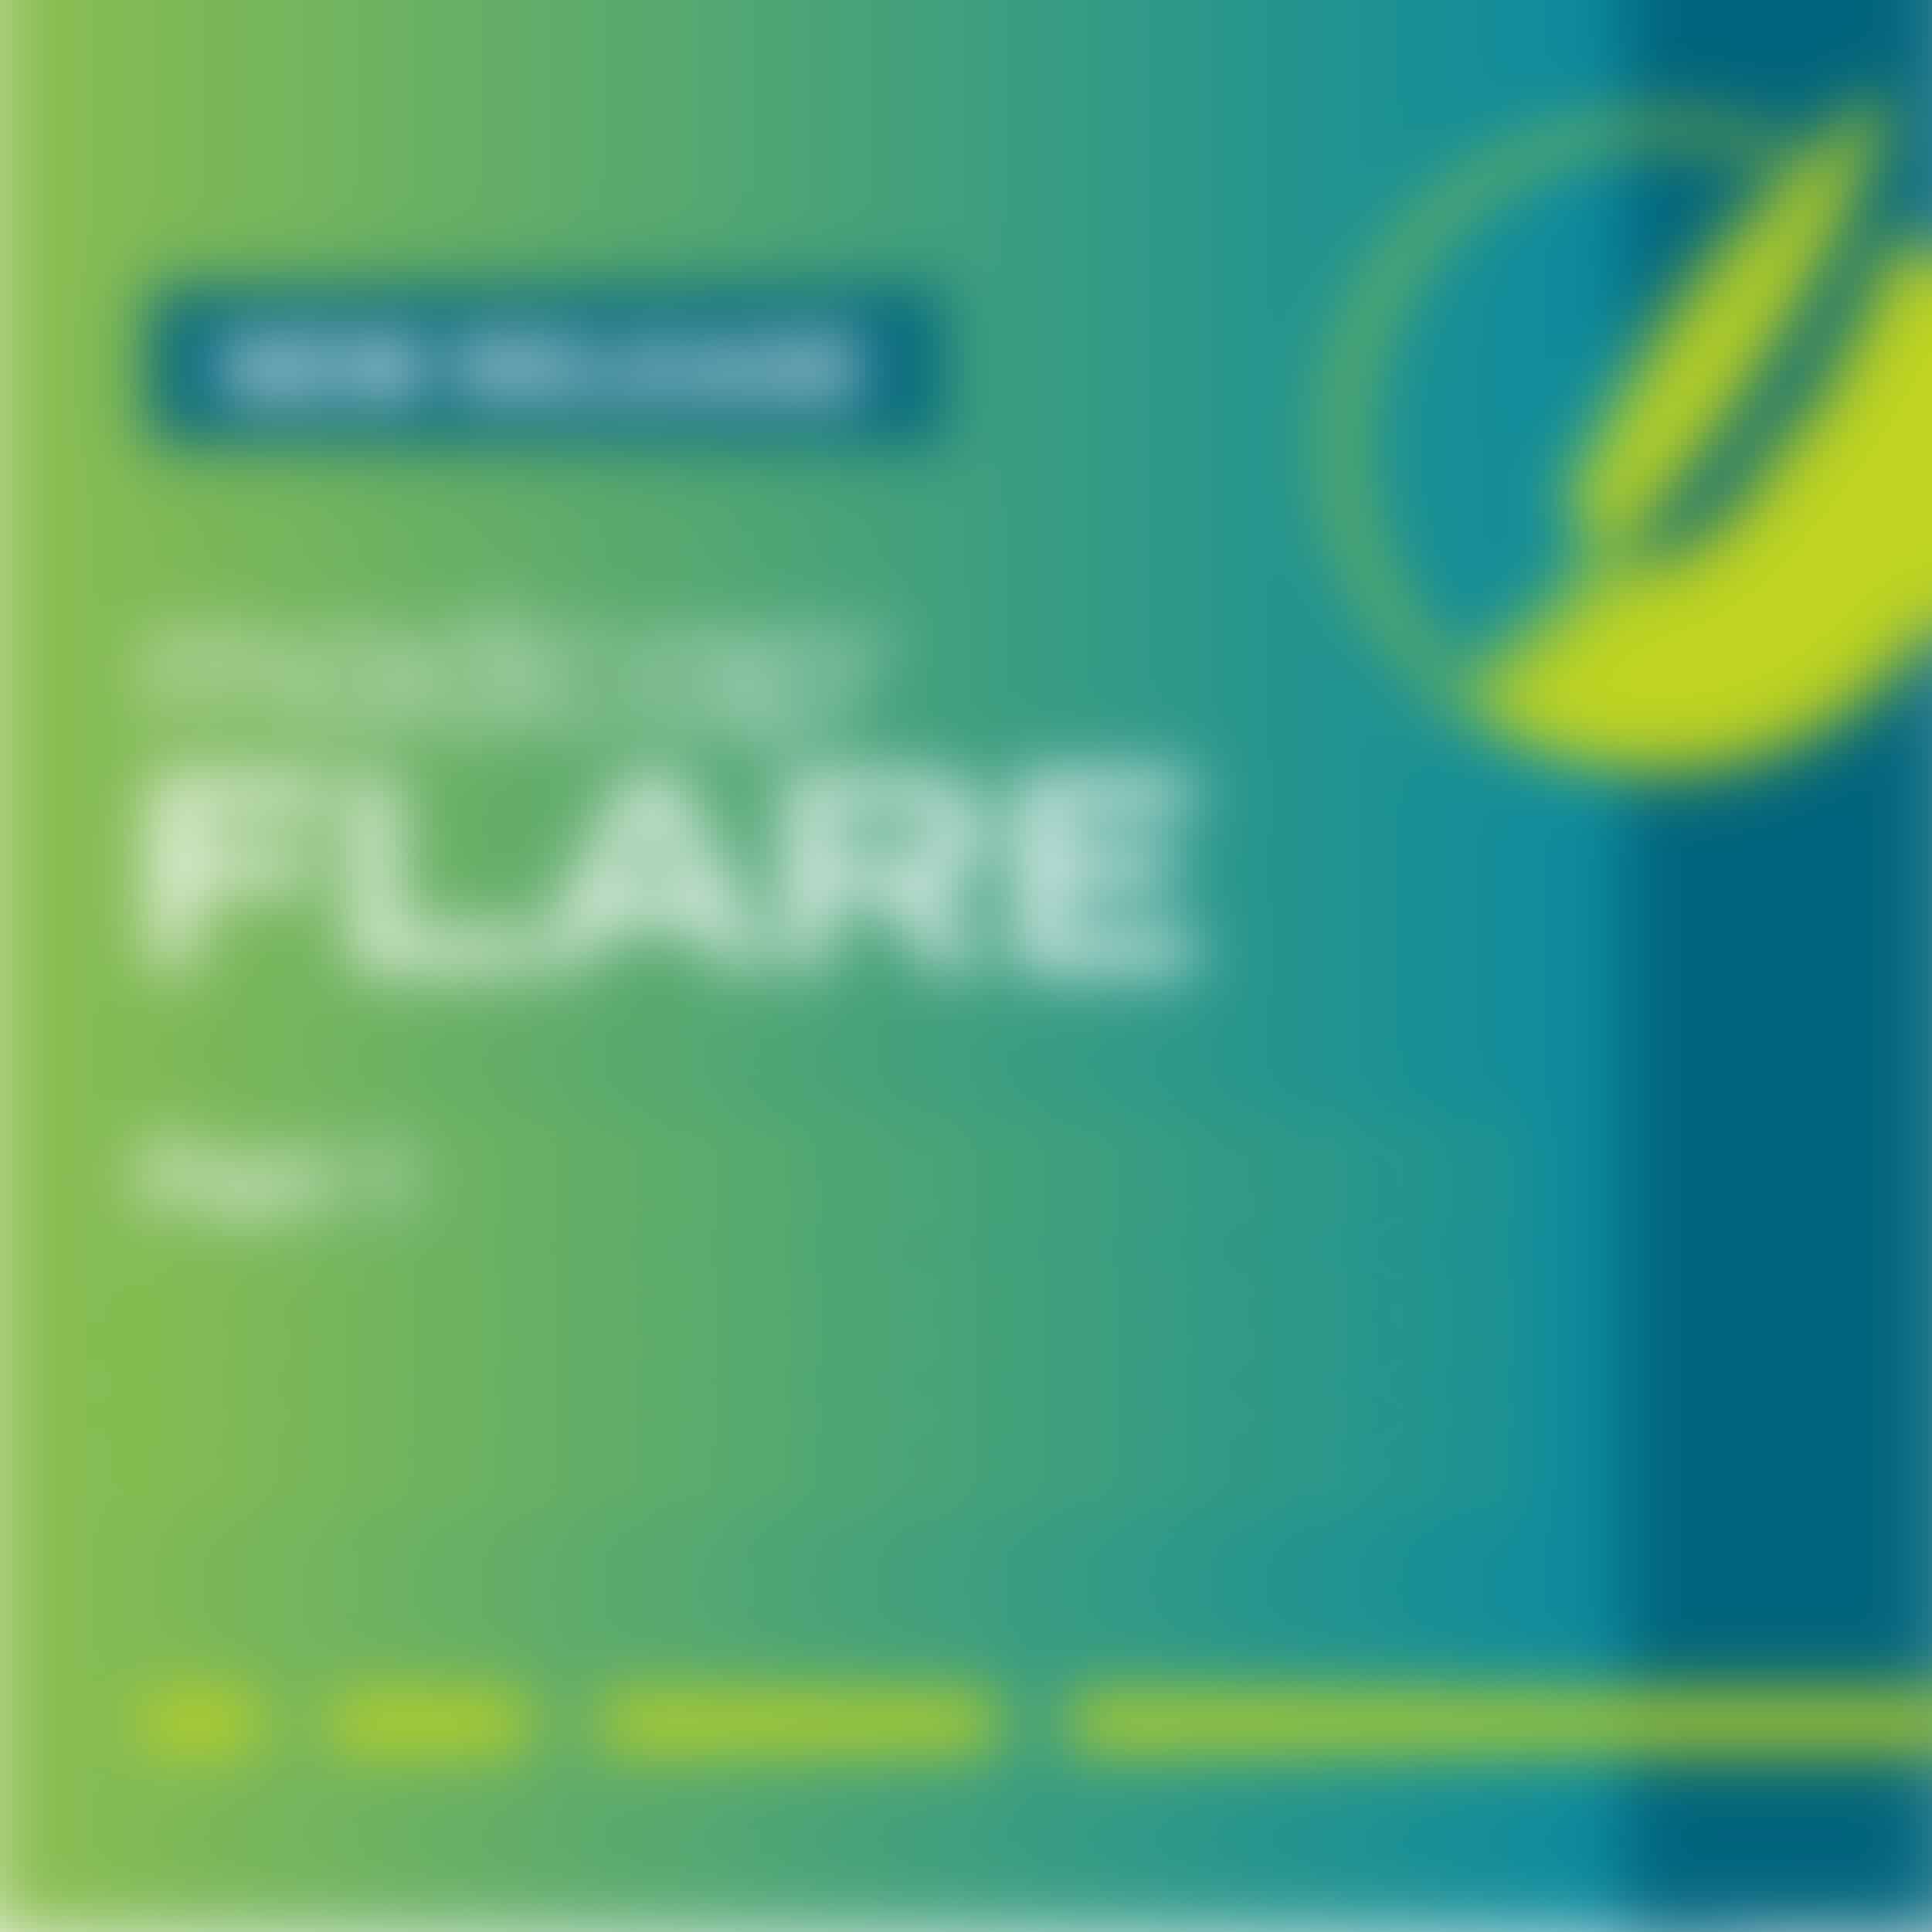 New Release: MadCap Flare 2020 r2 Adds Definition List, List Enhancements and More, Part 1